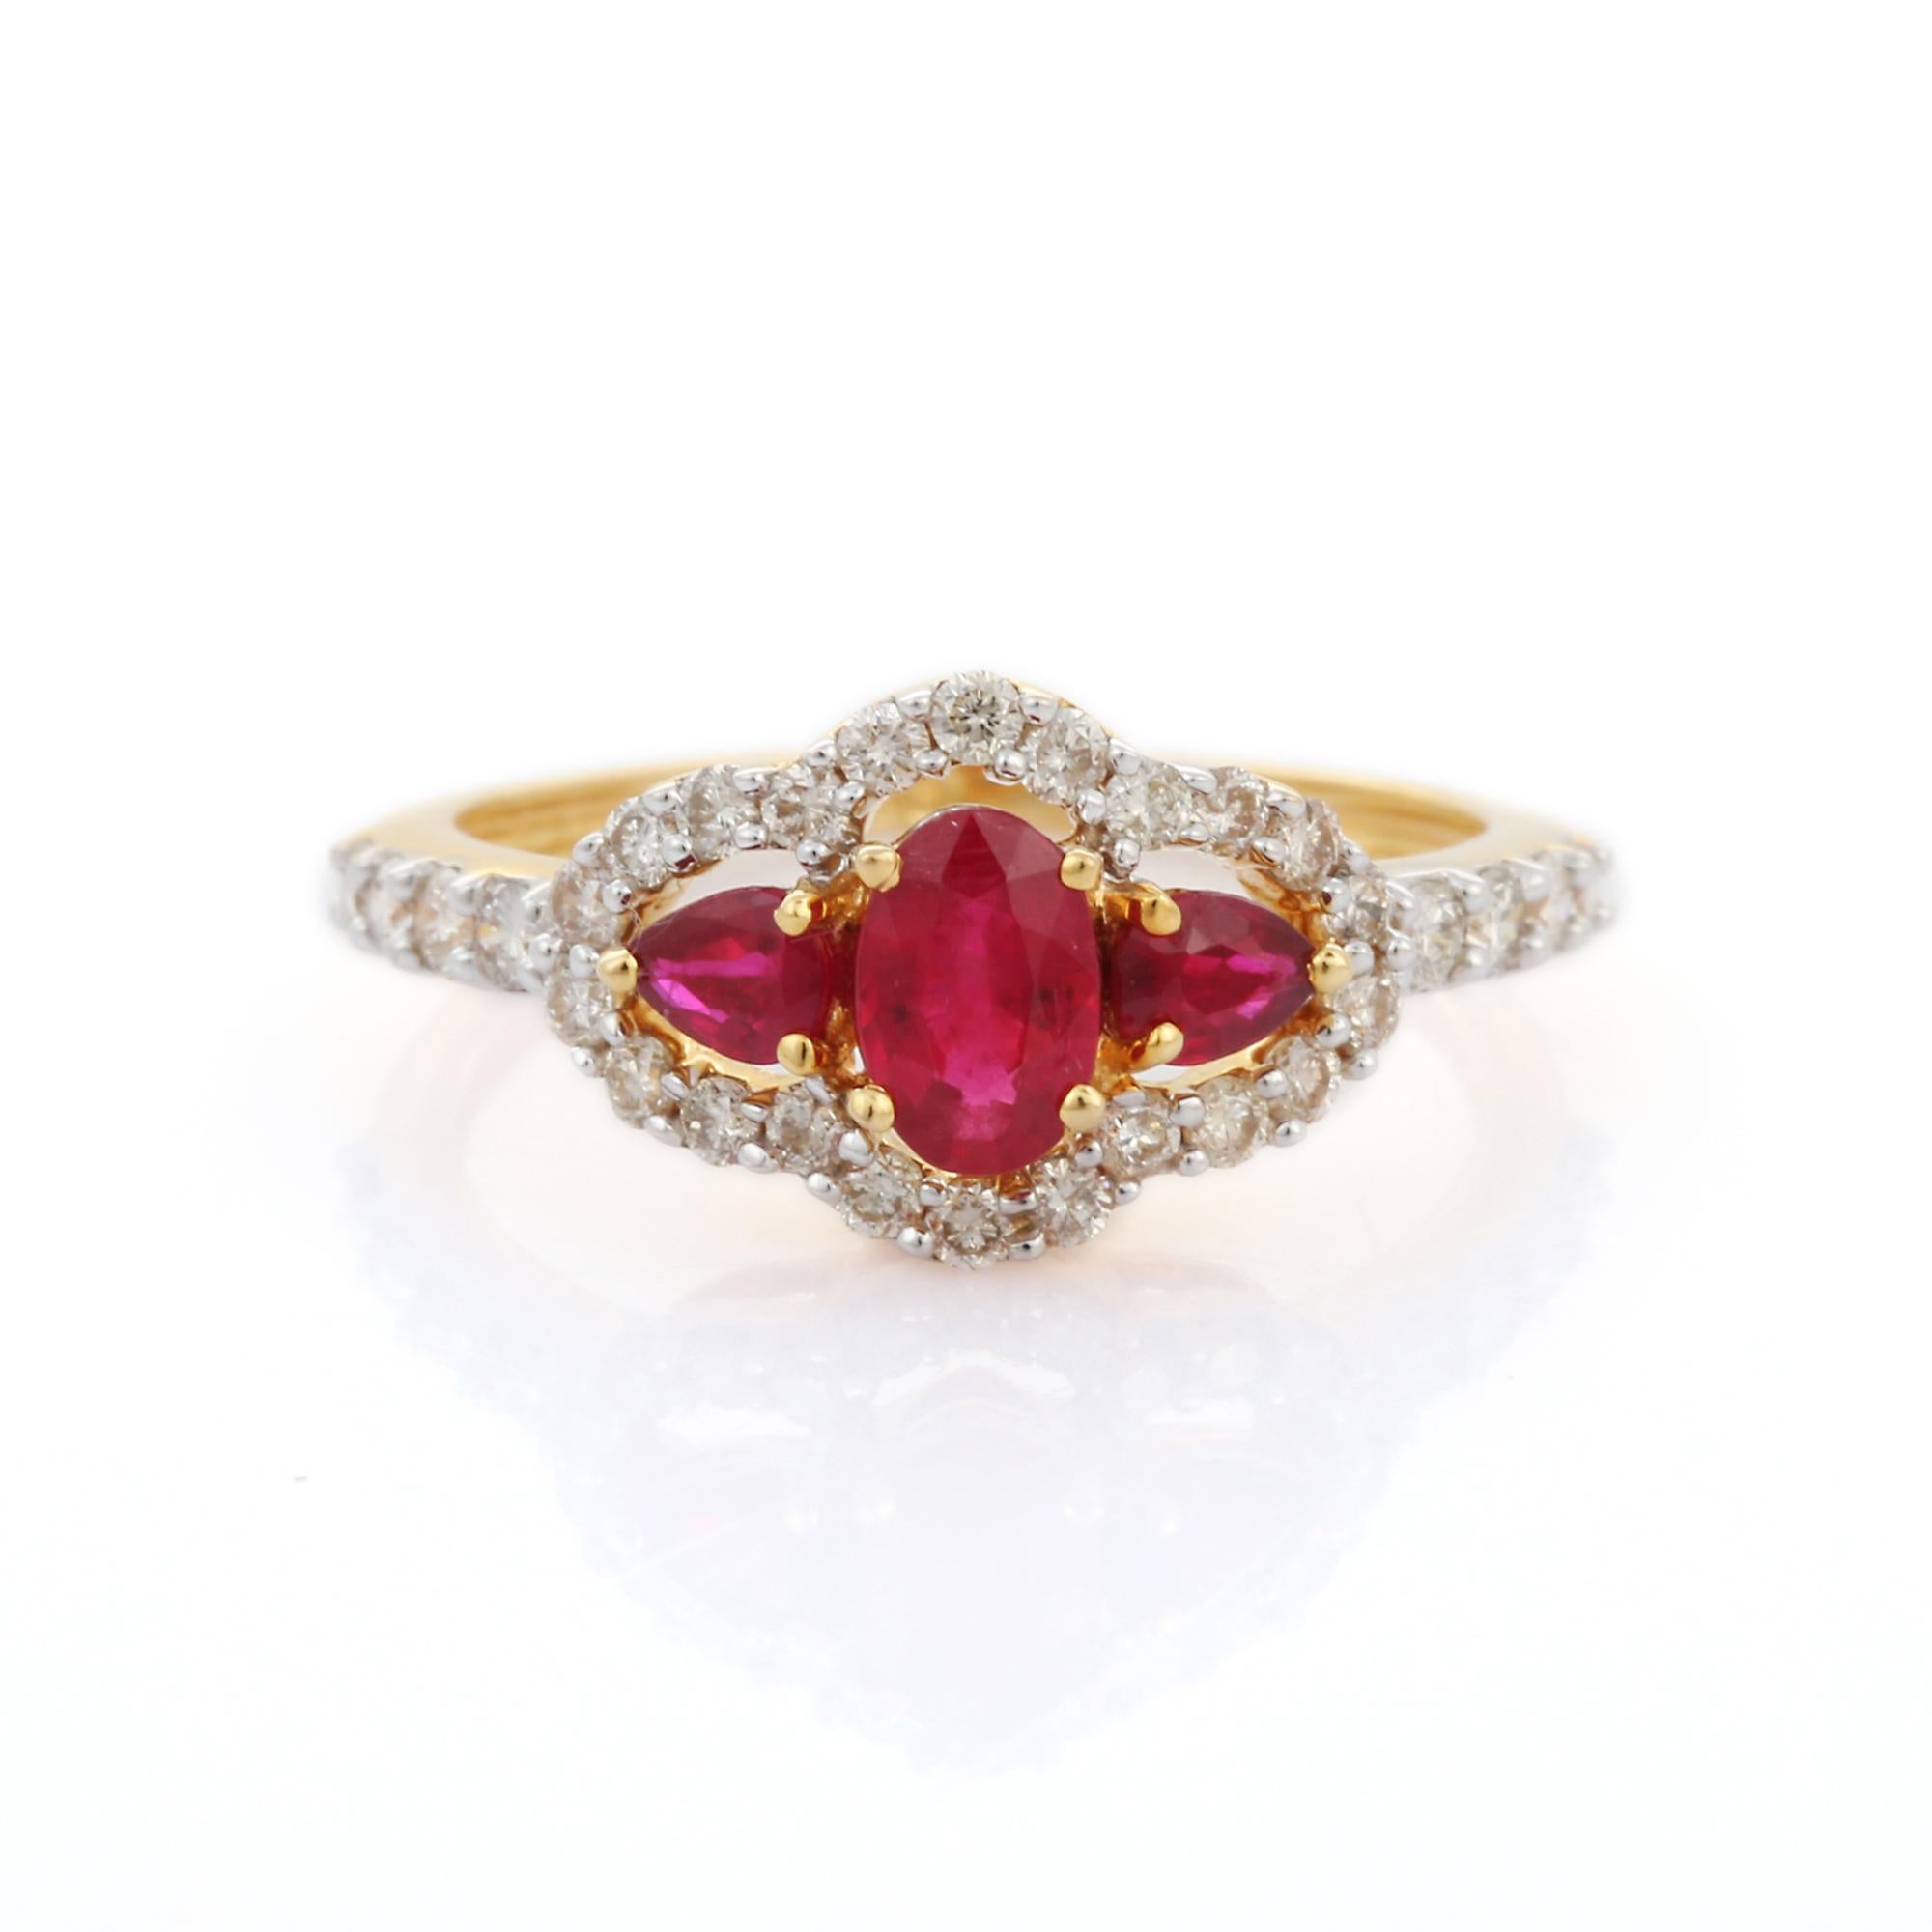 For Sale:  18K Yellow Gold Oval Cut Ruby Cluster Diamond Engagement Ring 9